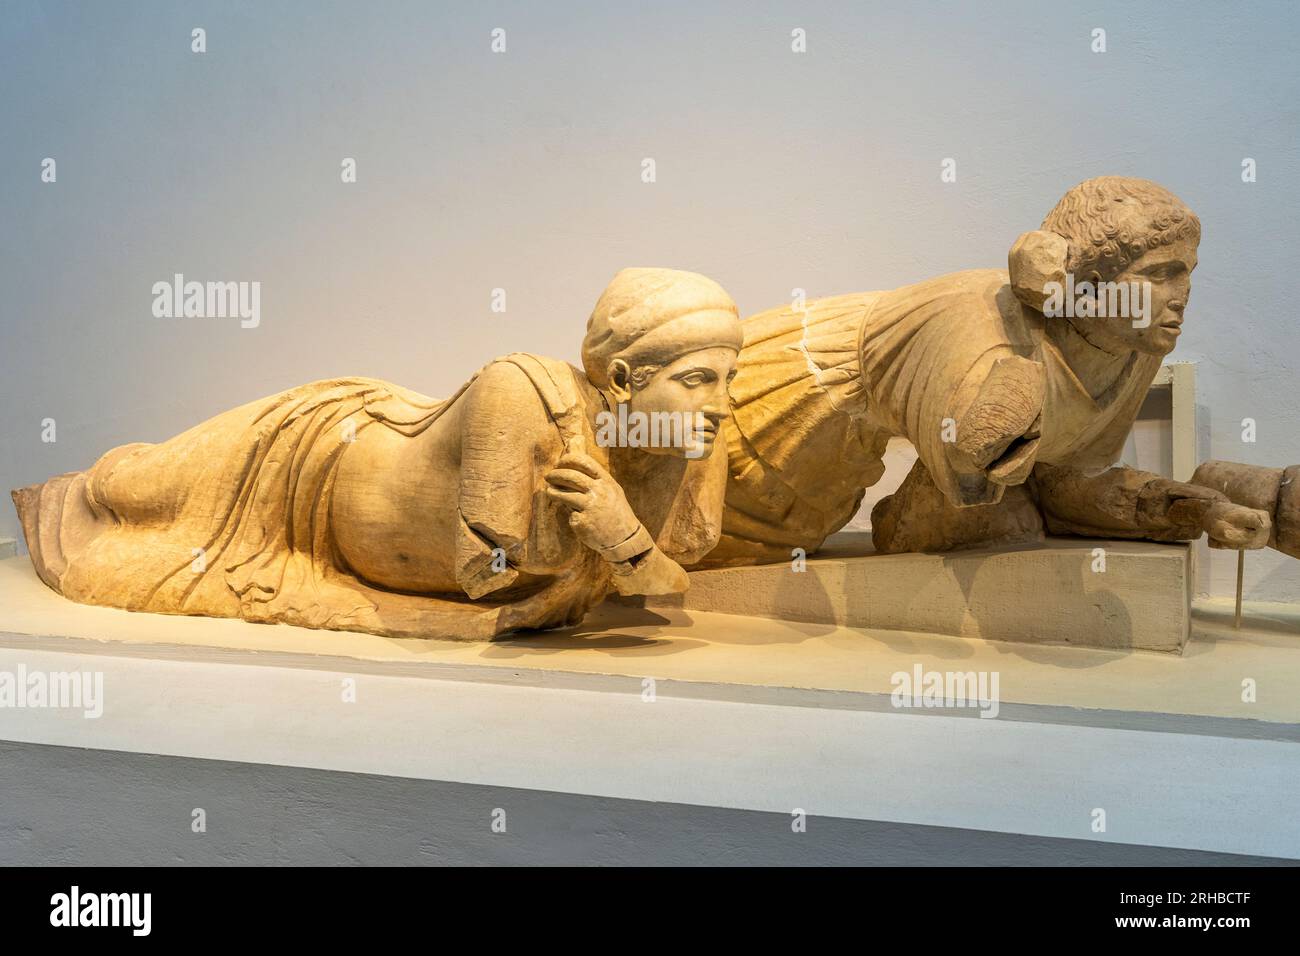 Two lying women from the pediment frieze of the Temple of Zeus on display at the Archaeological Museum at ancient Olympia, Elis, Peloponnese, Greece Stock Photo